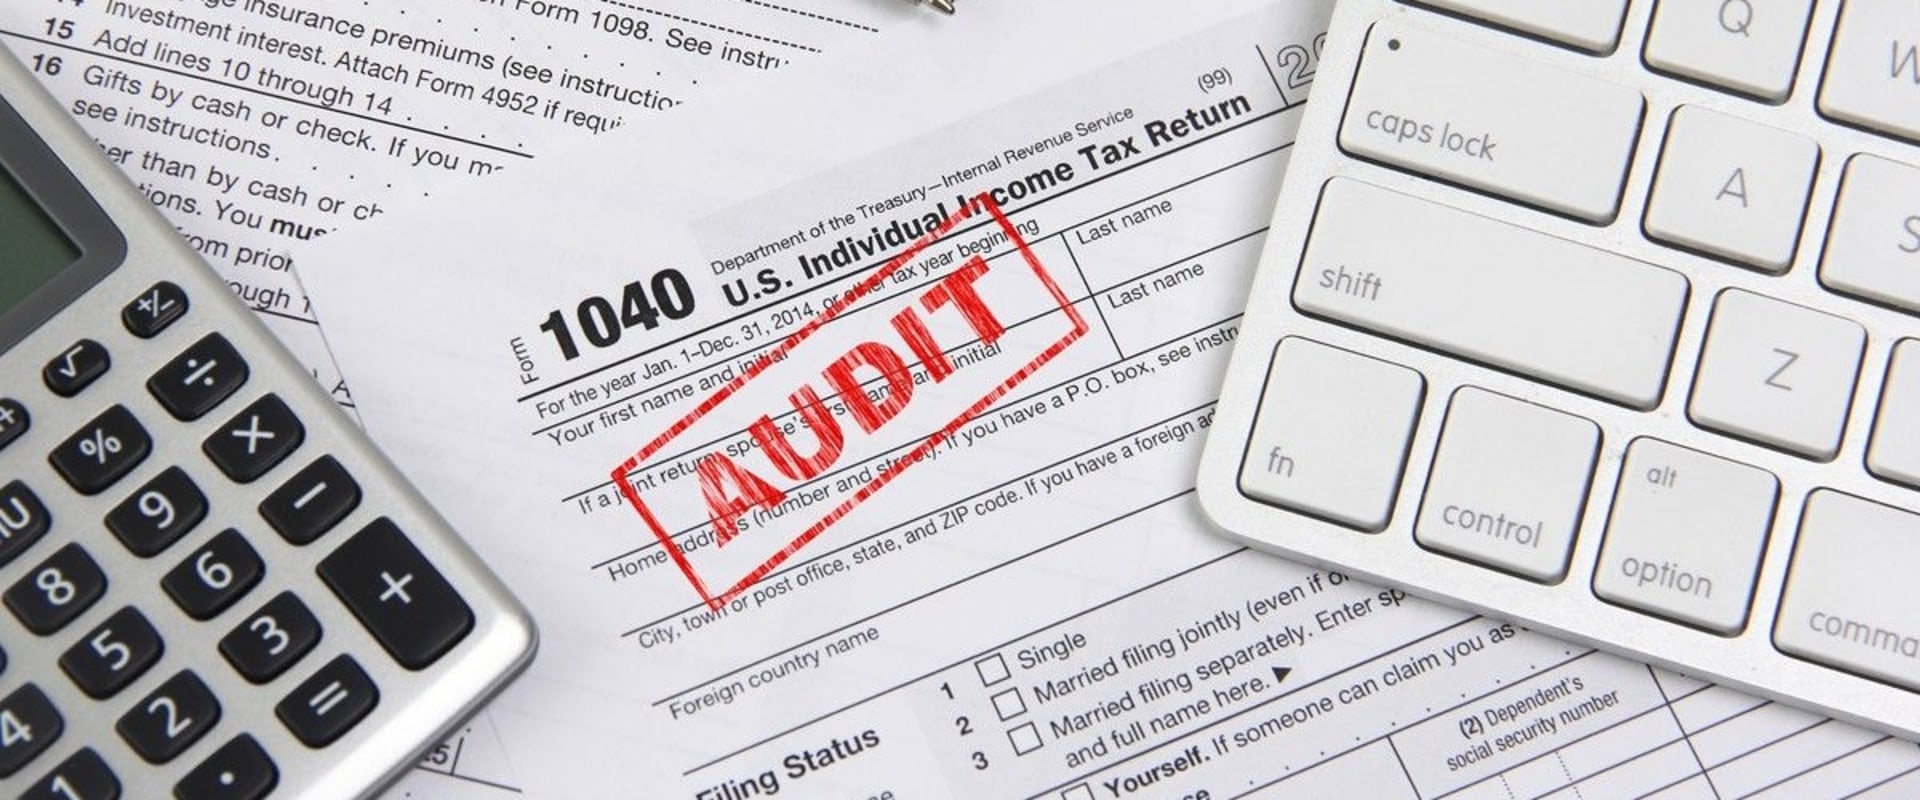 Does the irs have a one-time forgiveness program?